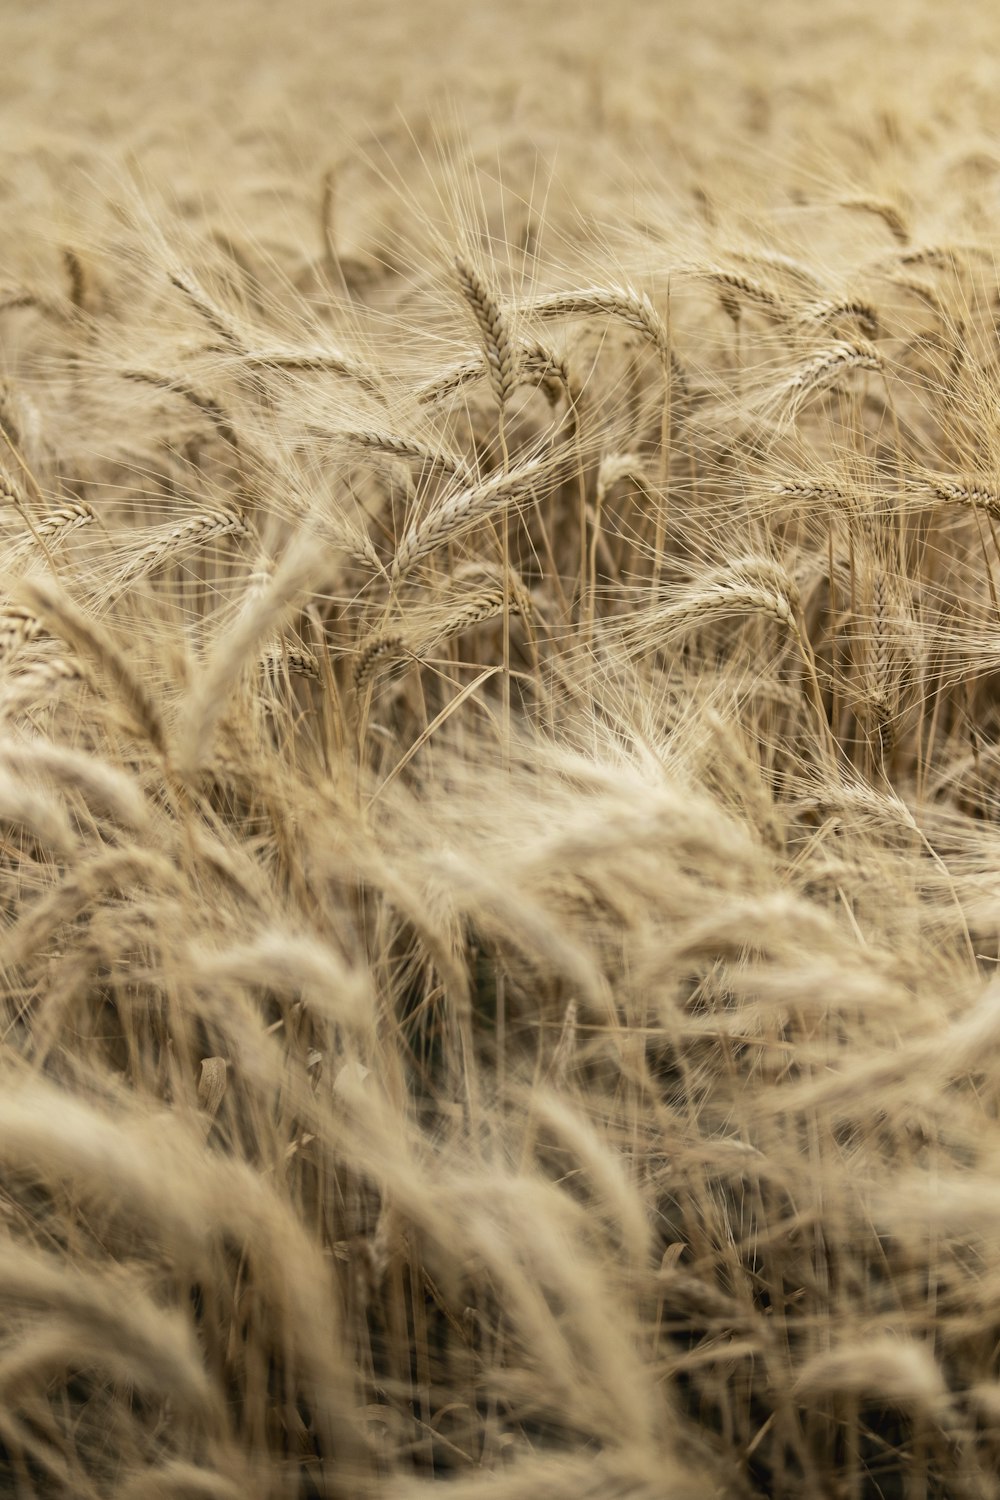 a close up of some wheat